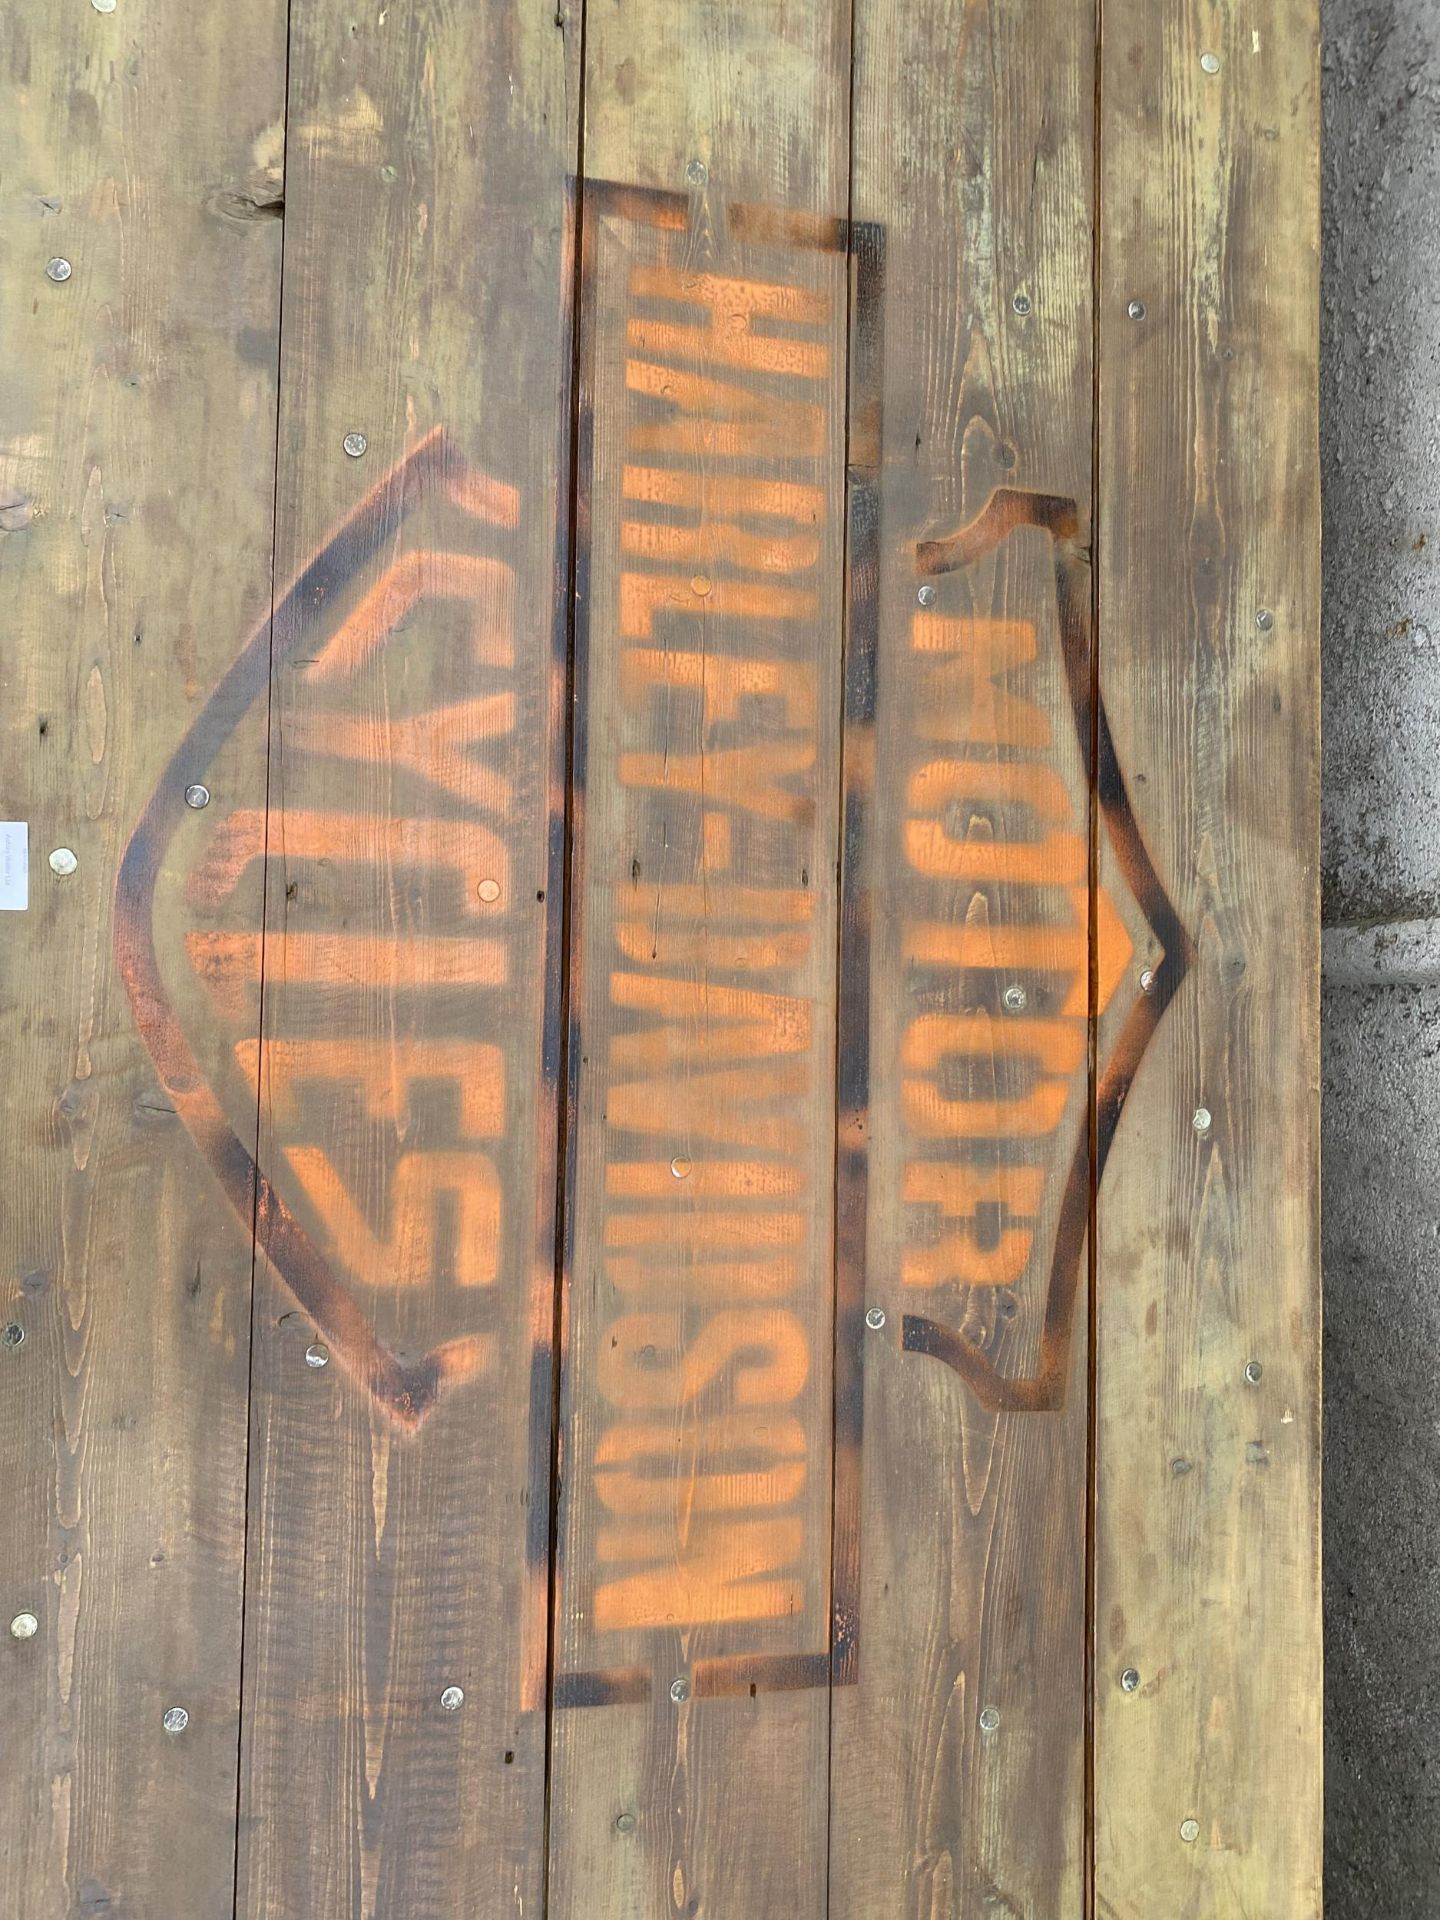 A RUSTIC LOW COFFEE TABLE, THE TOP BEARING HARLEY-DAVIDSON MOTORCYCLES LOGO, 56X27" - Image 3 of 3